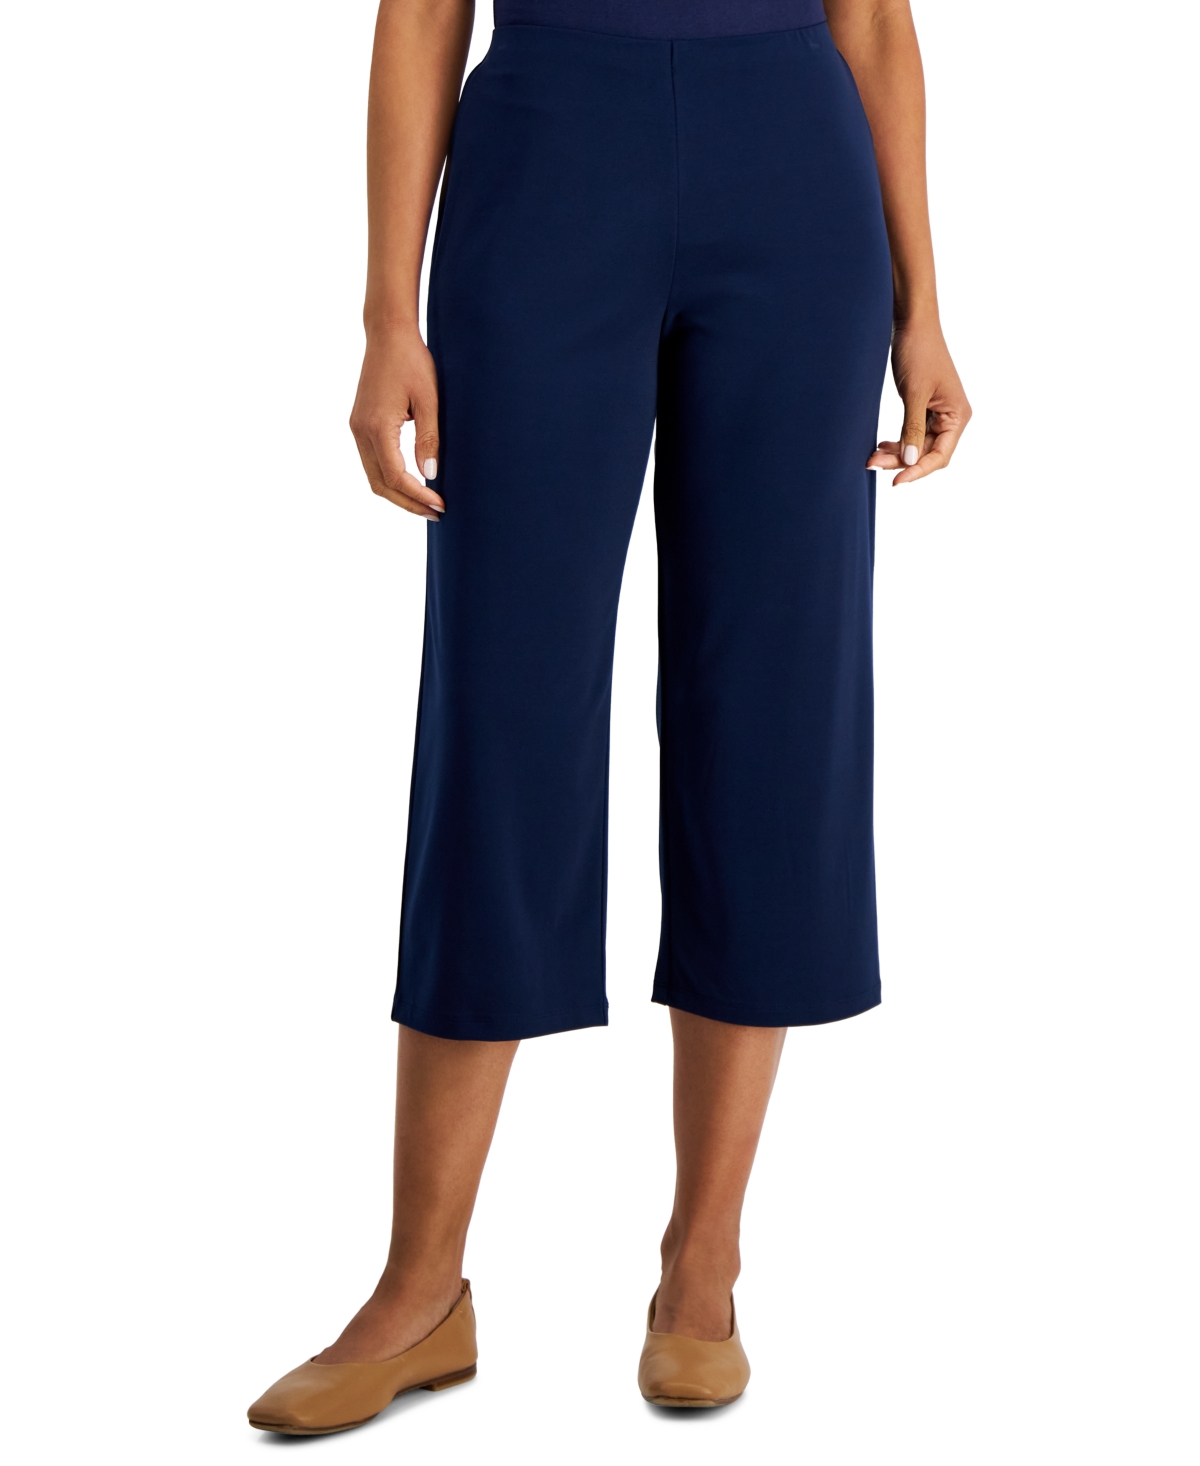 Jm Collection Petite Solid Knit Cropped Pants, Created For Macy's In Intrepid Blue